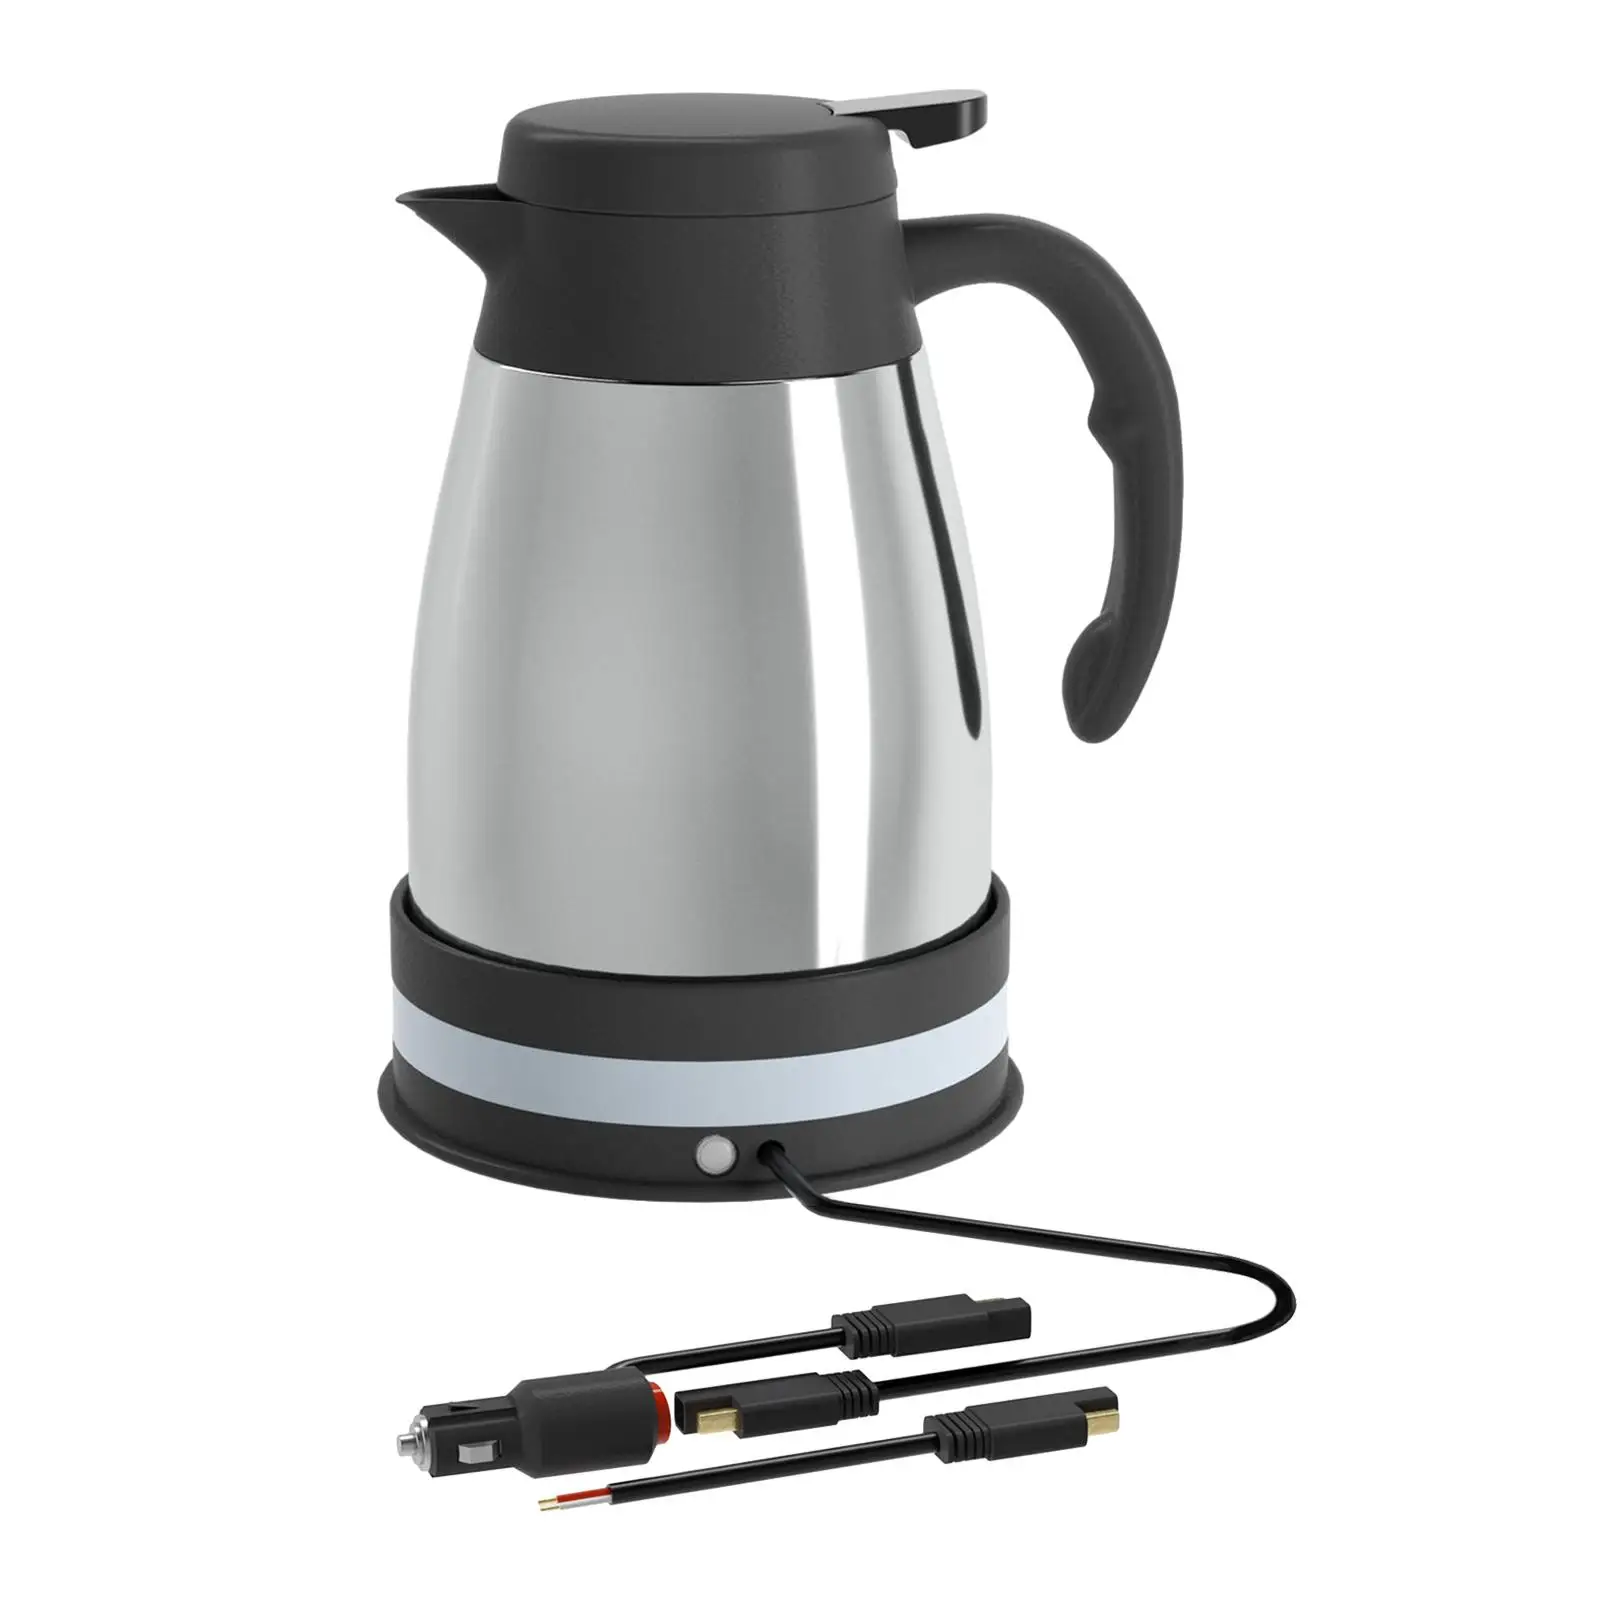 Car Electric Kettle Pot DC 24V Stainless Steel Portable Fast Boiling Portable Auto Shut Off Kettle Boiler for Road Trips